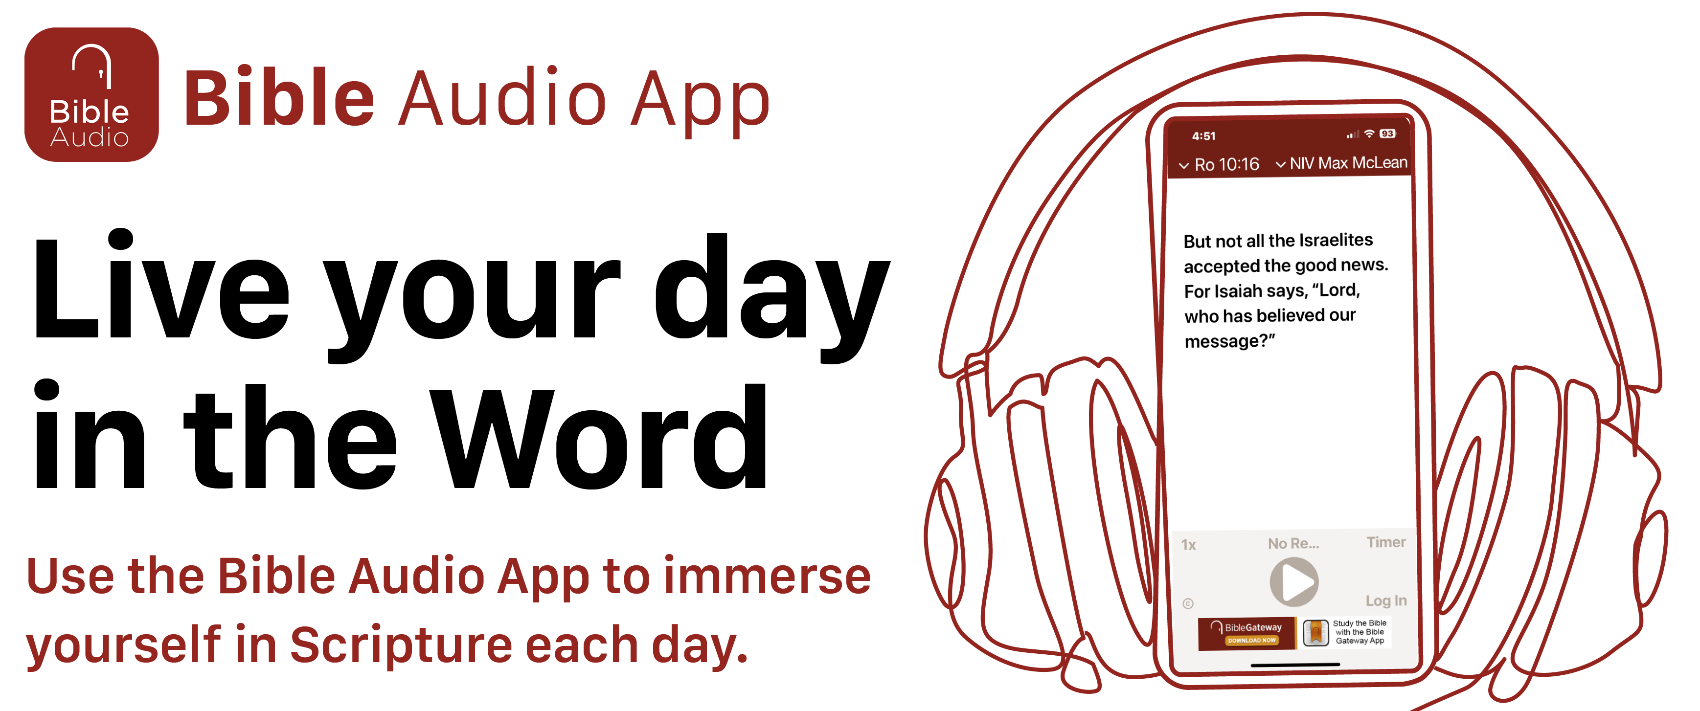 Live your day in the Word. Use the Bible Audio App to immerse yourself in Scripture each day